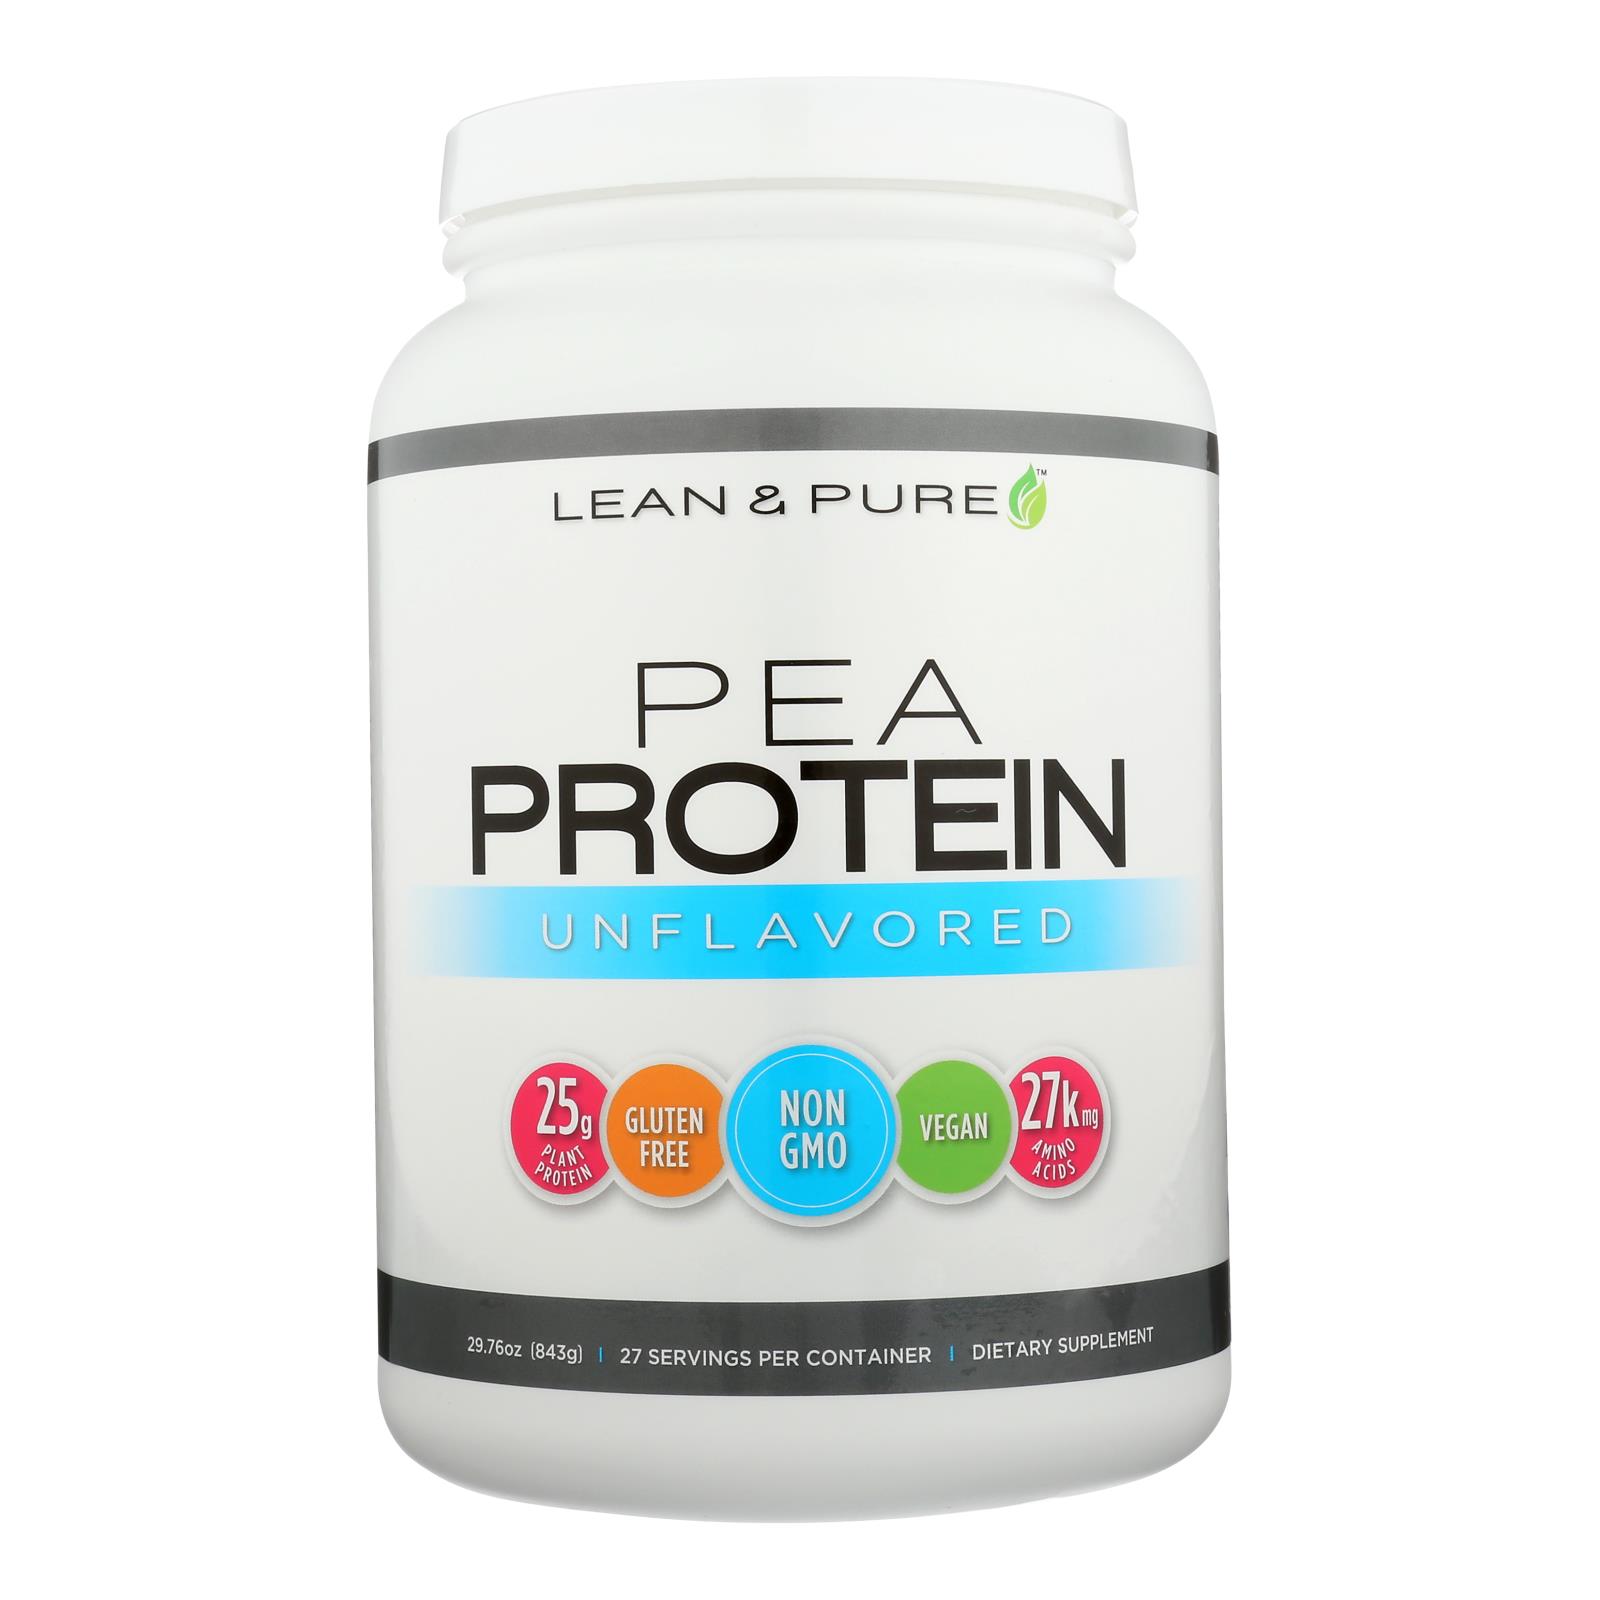 Lean & Pure - Prot Pea Unflavored - 1 Each - 29.76 OZ